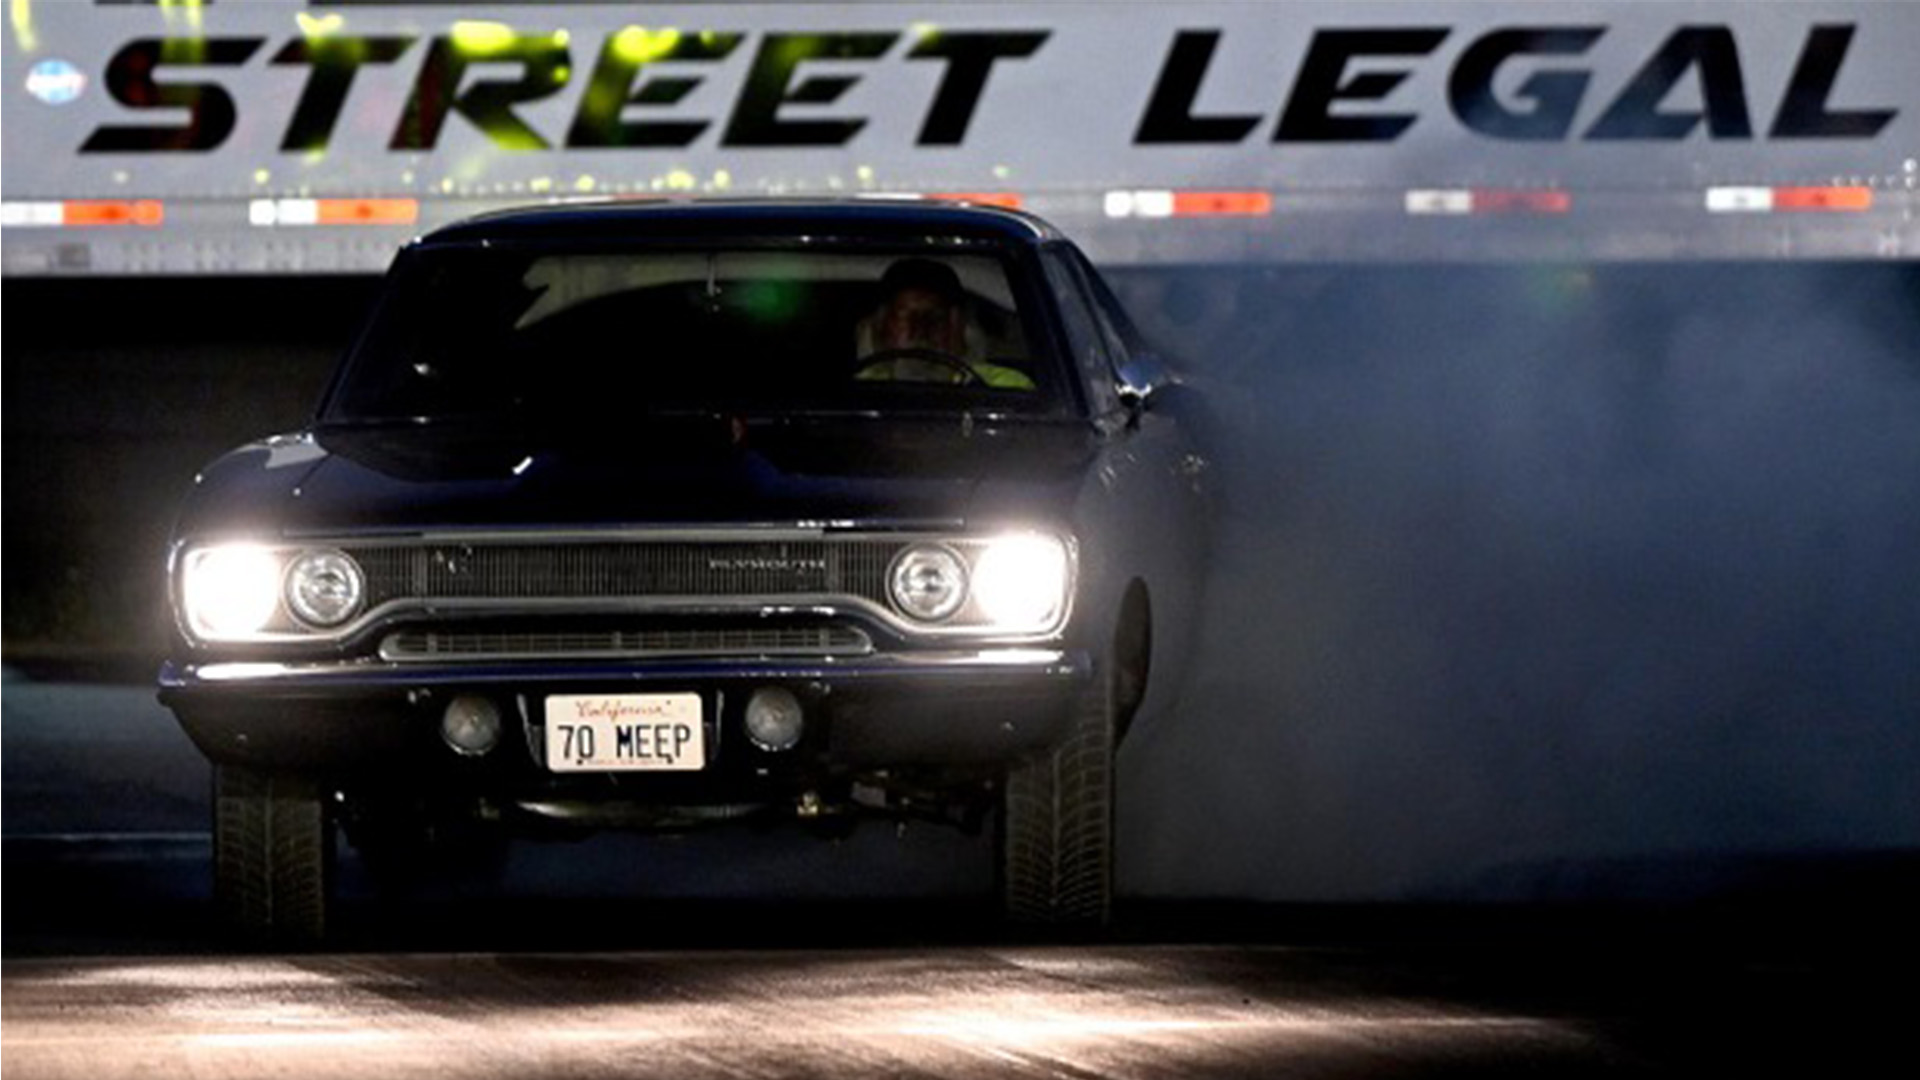 Your Slow Car Might Actually Feel Fast at This New Street Legal Dragway